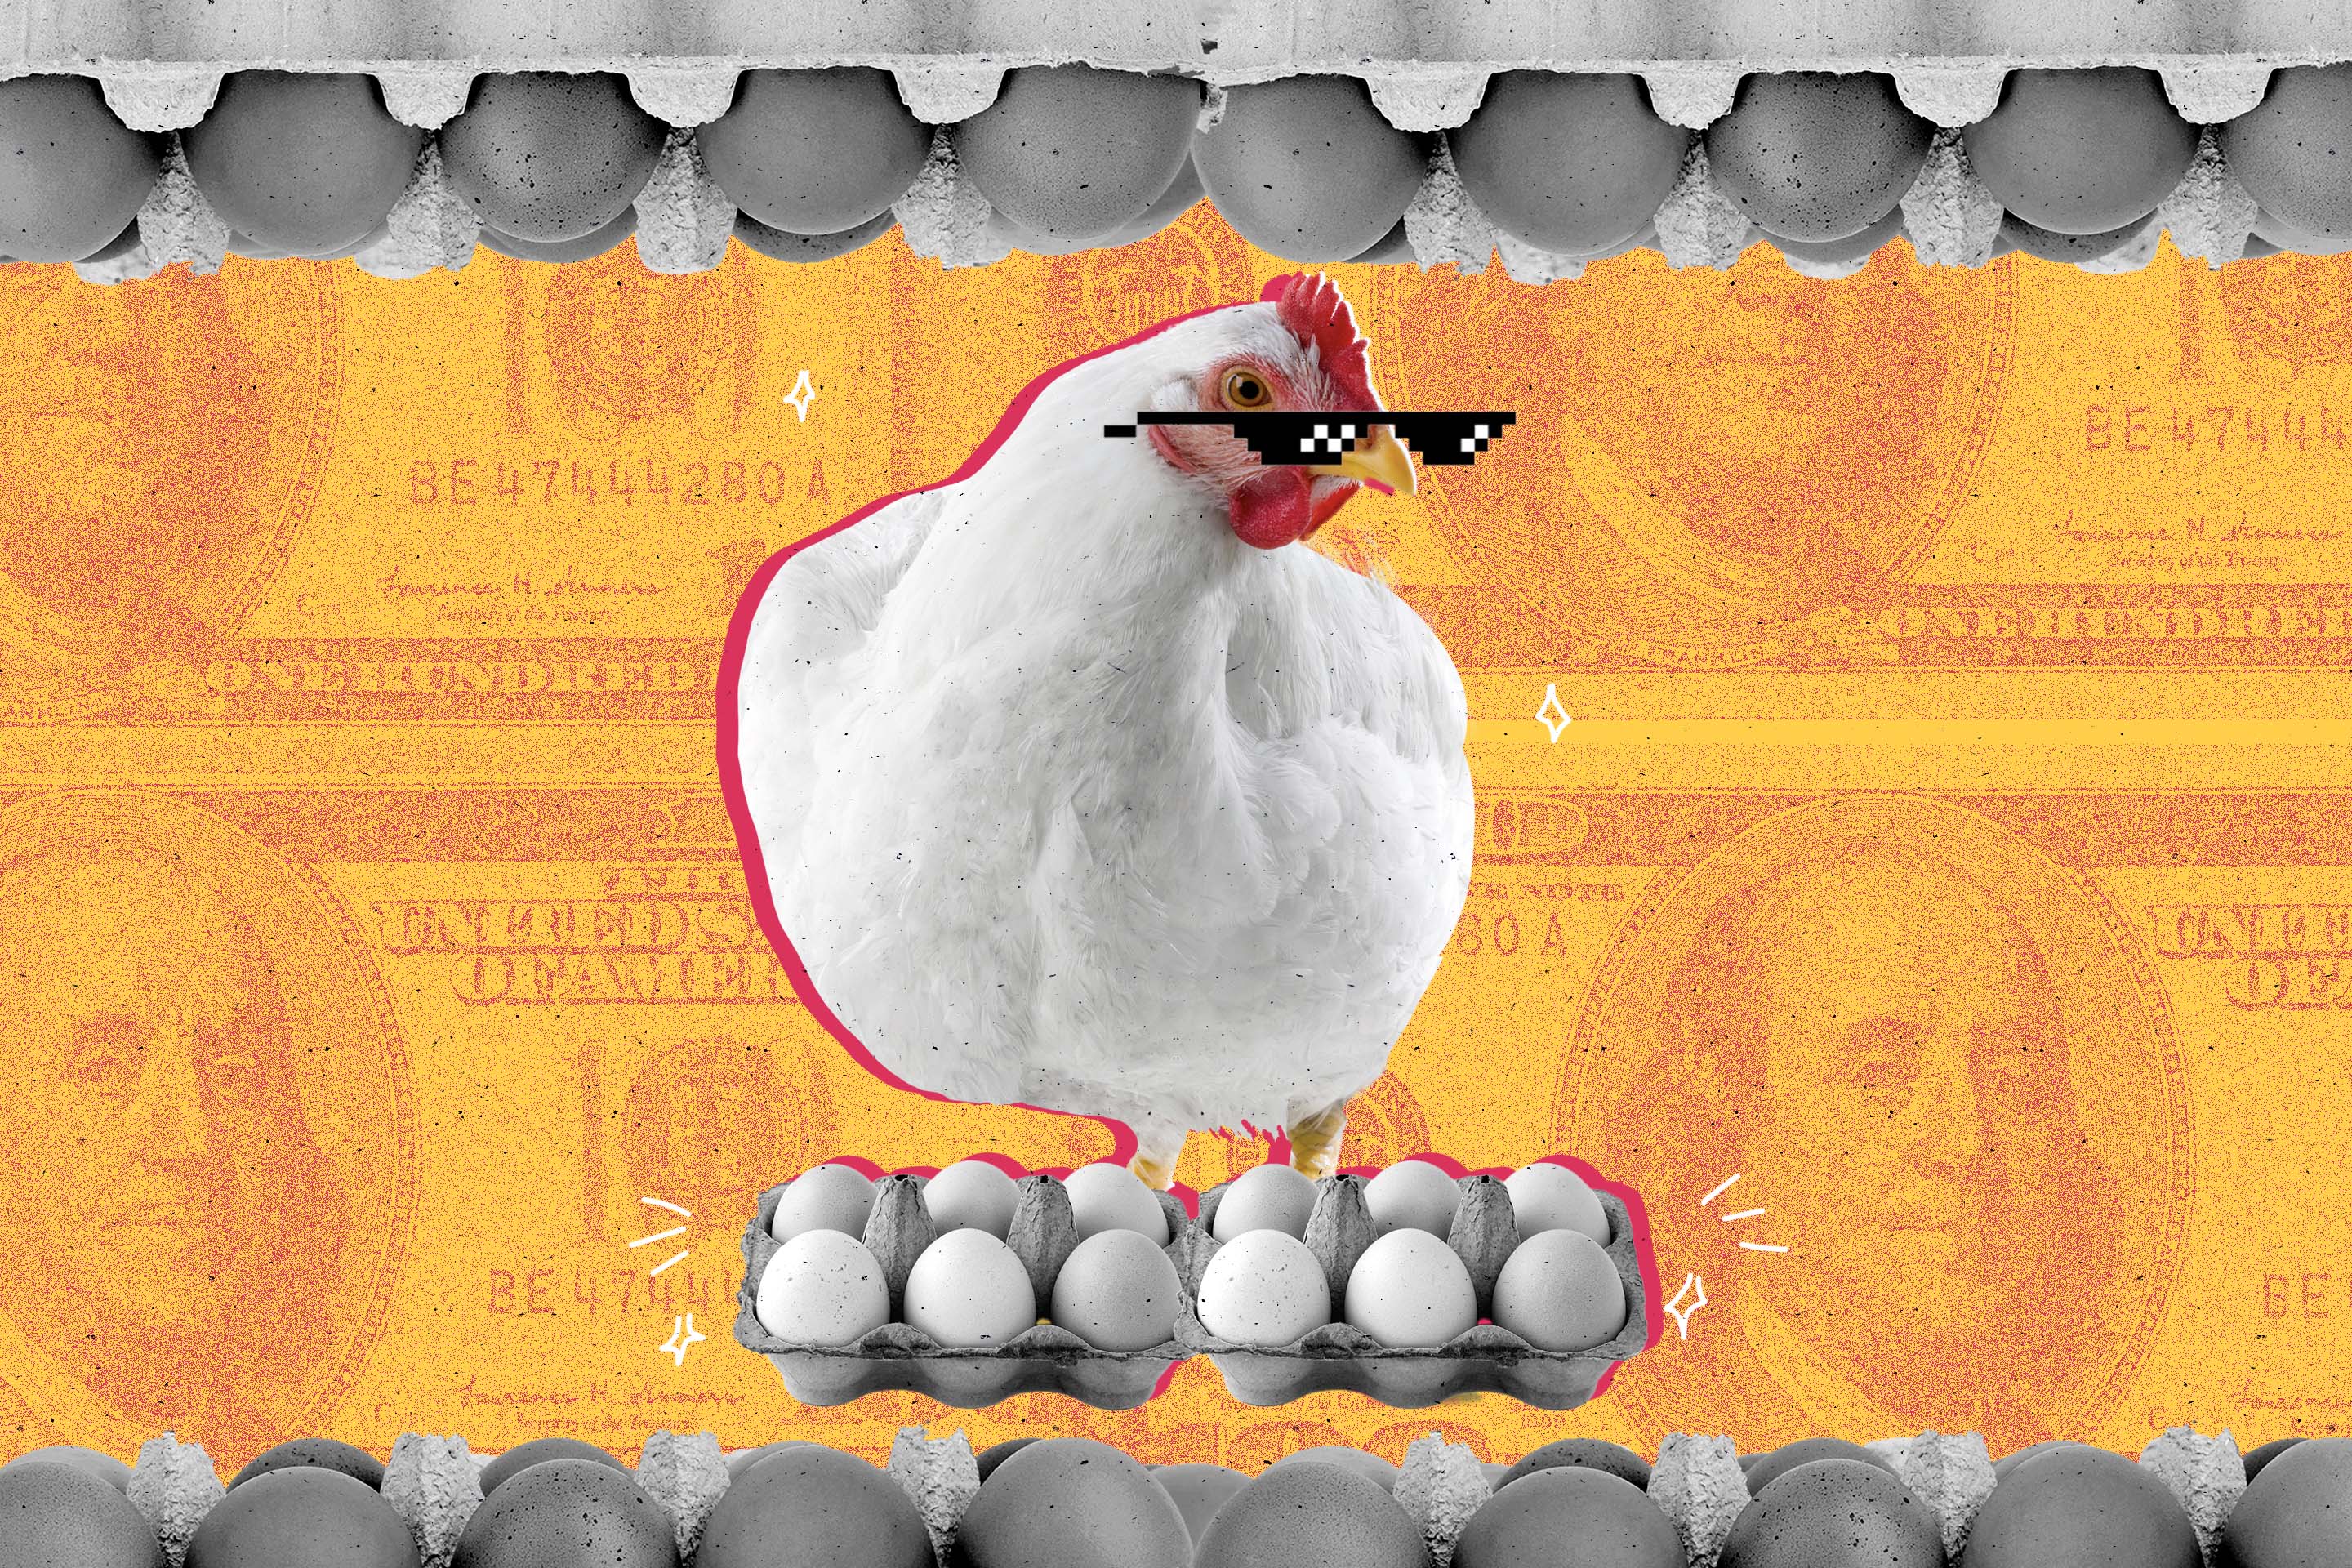 Which Came First, Inflation or the Egg Meme? - The New York Times